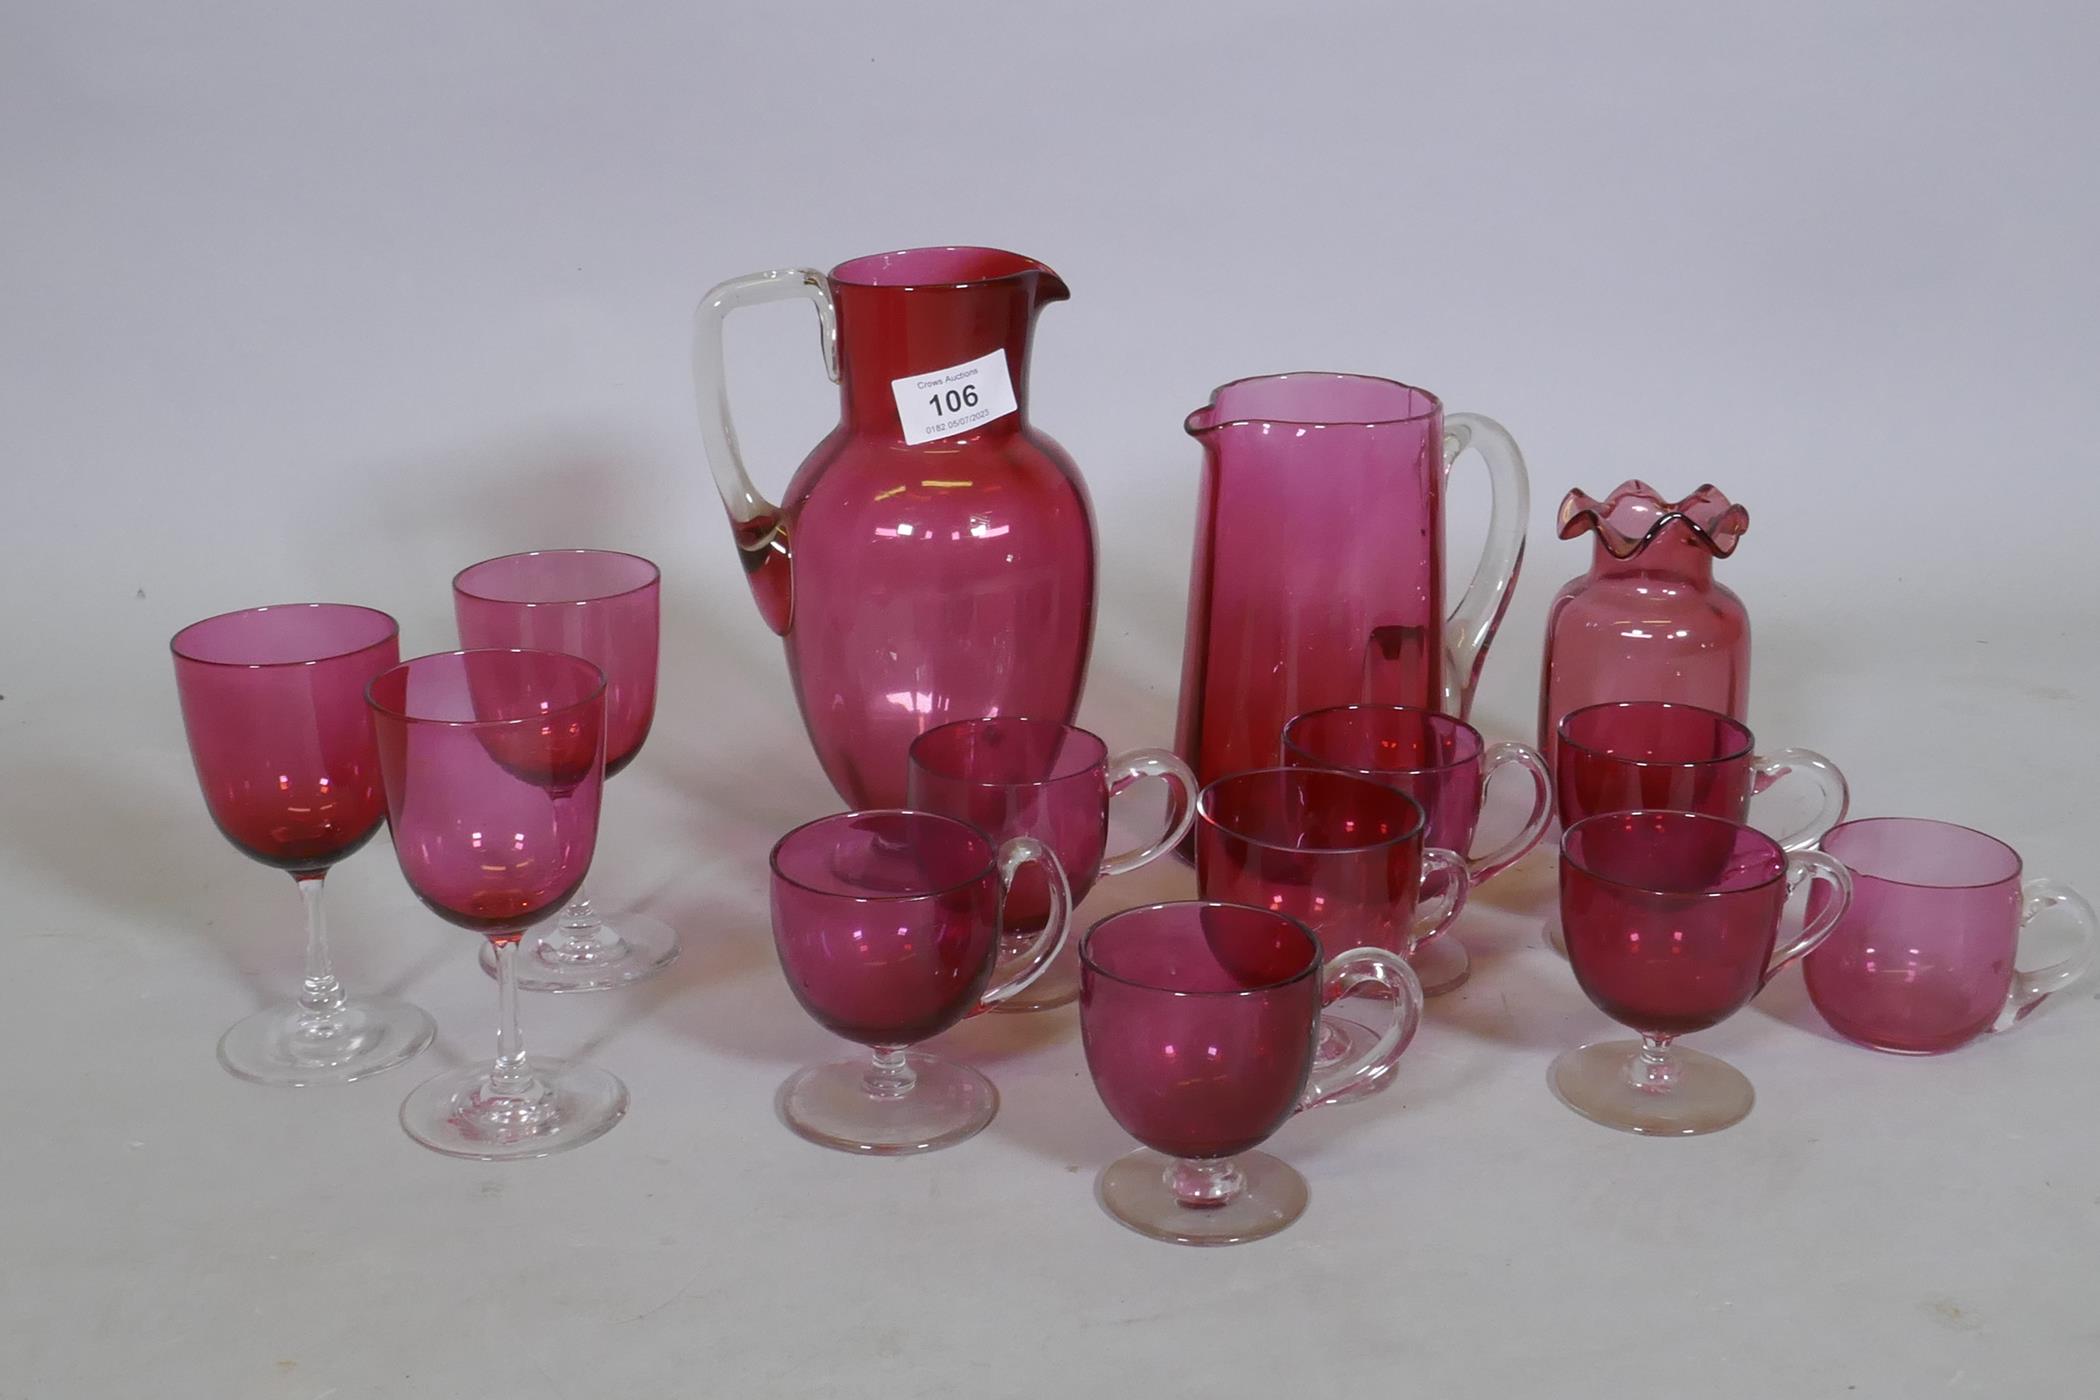 A quantity of Victorian cranberry glass, jugs, drinking glasses and custard cups